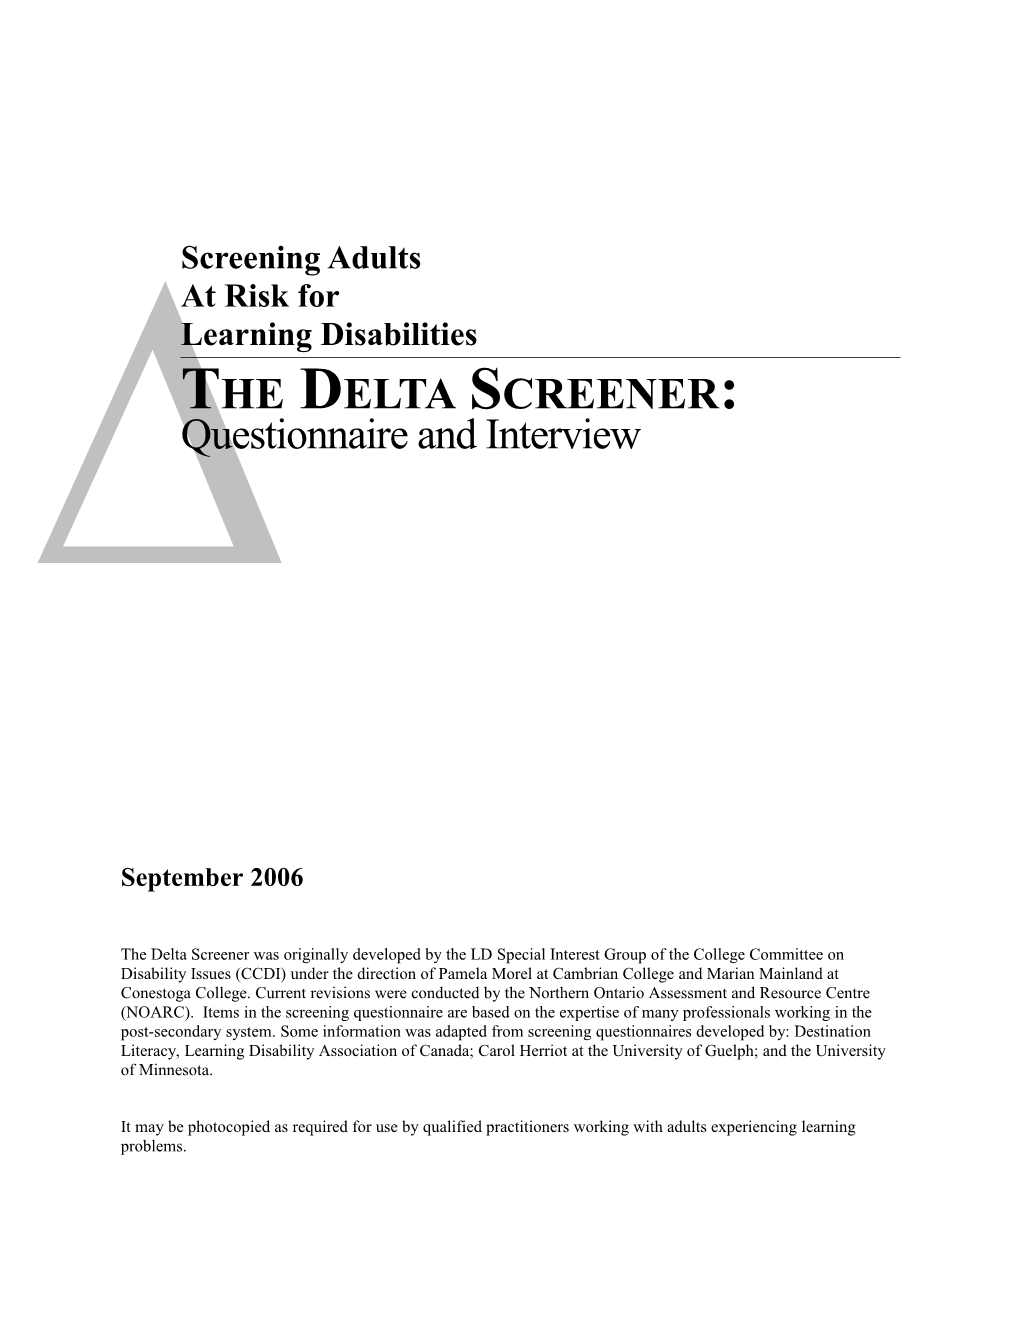 Screening Adults at Risk for Learning Disabilities